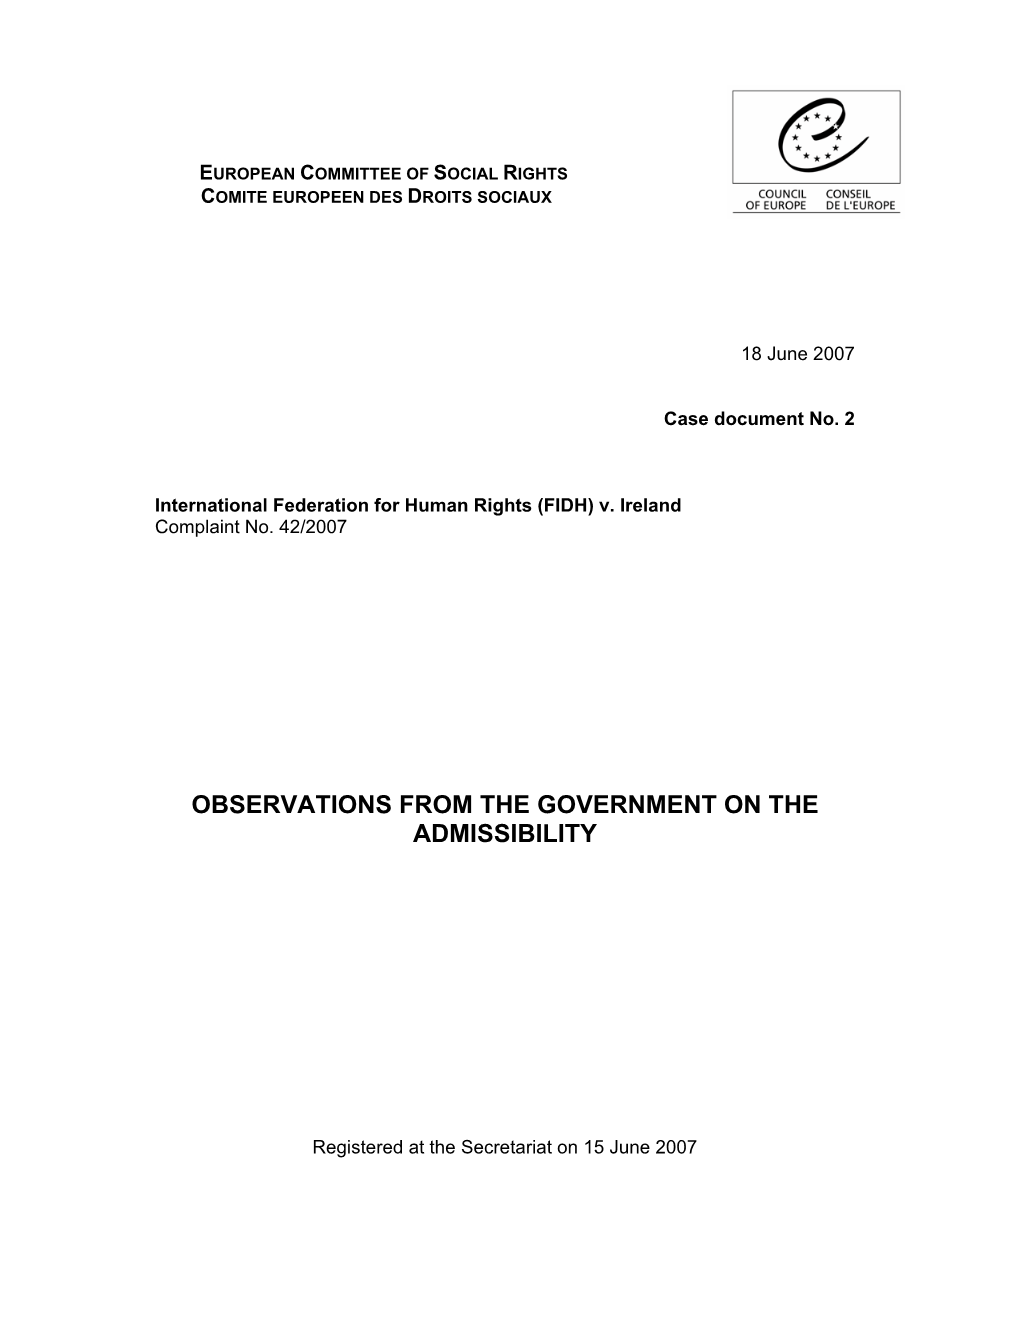 Observations from the Government on the Admissibility